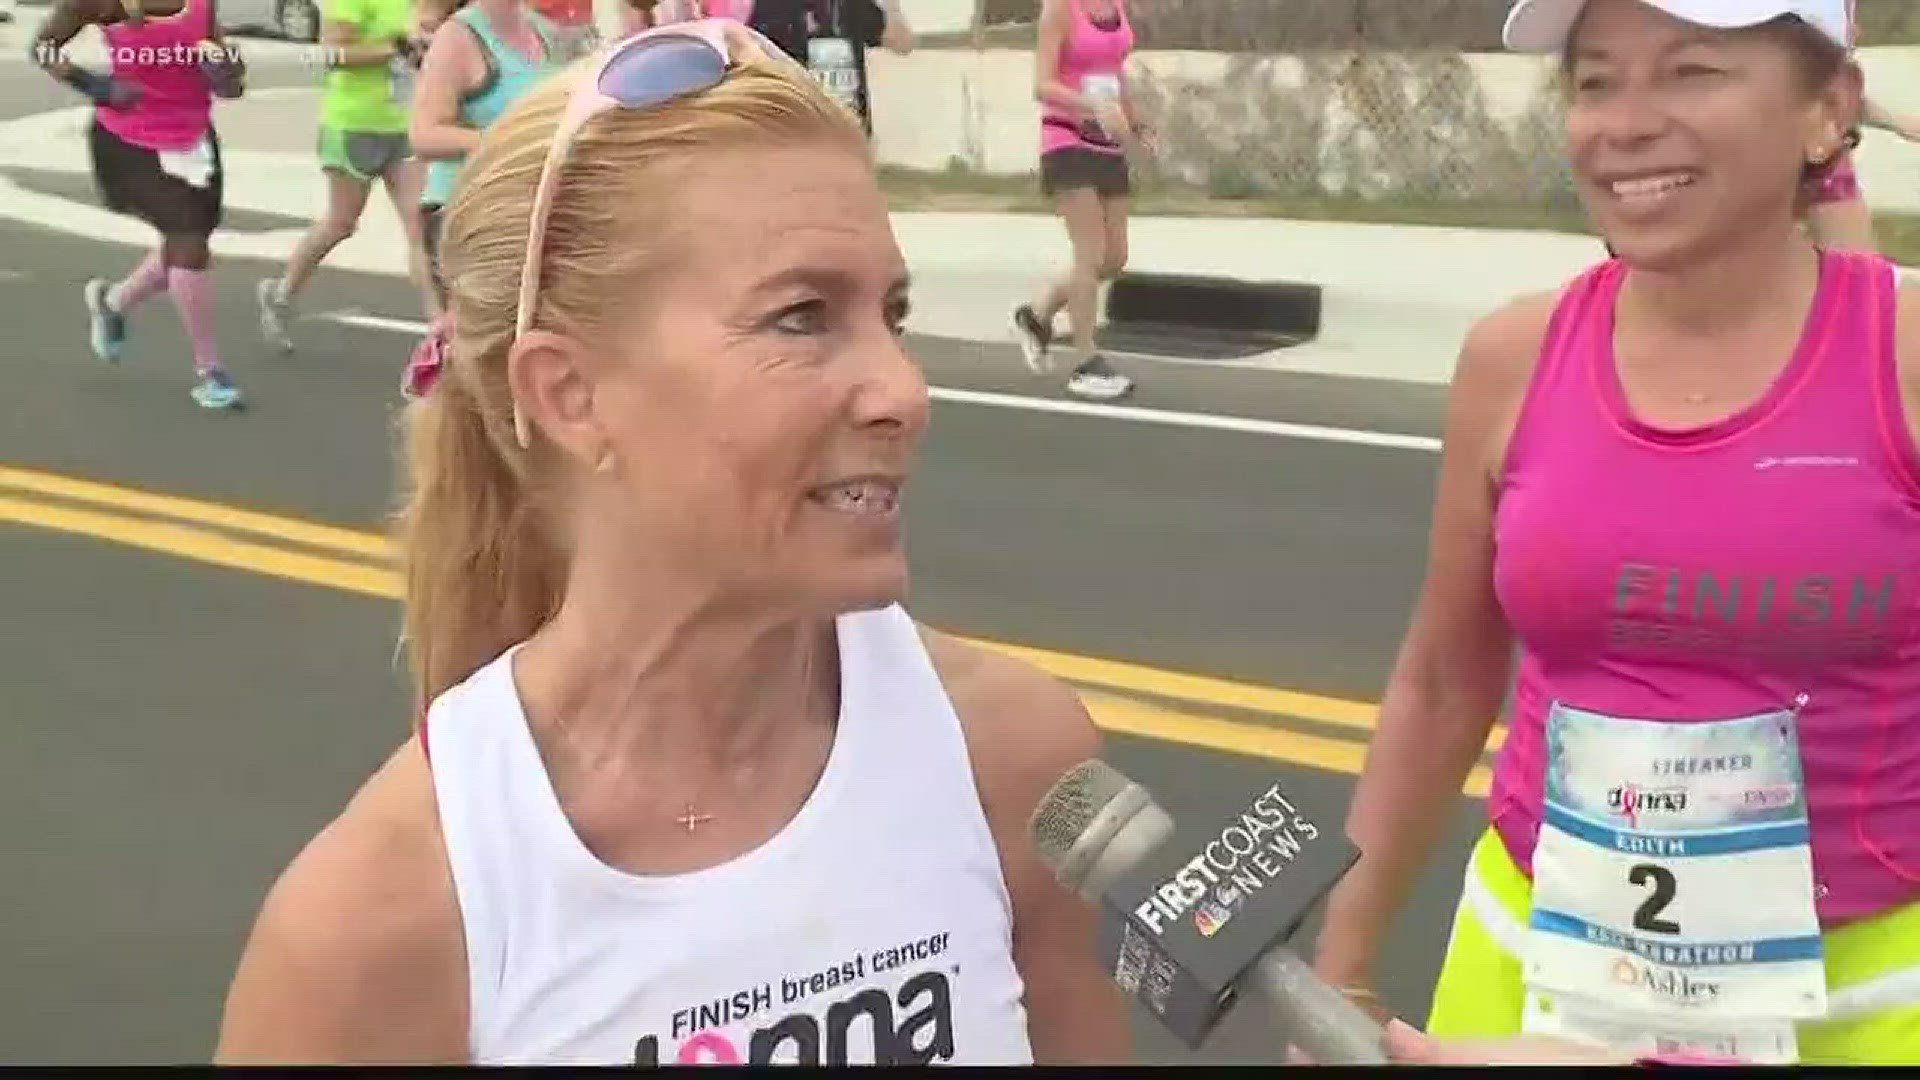 Take a look at some of the highlights from Sunday's 26.2 Donna Marathon on the First Coast.